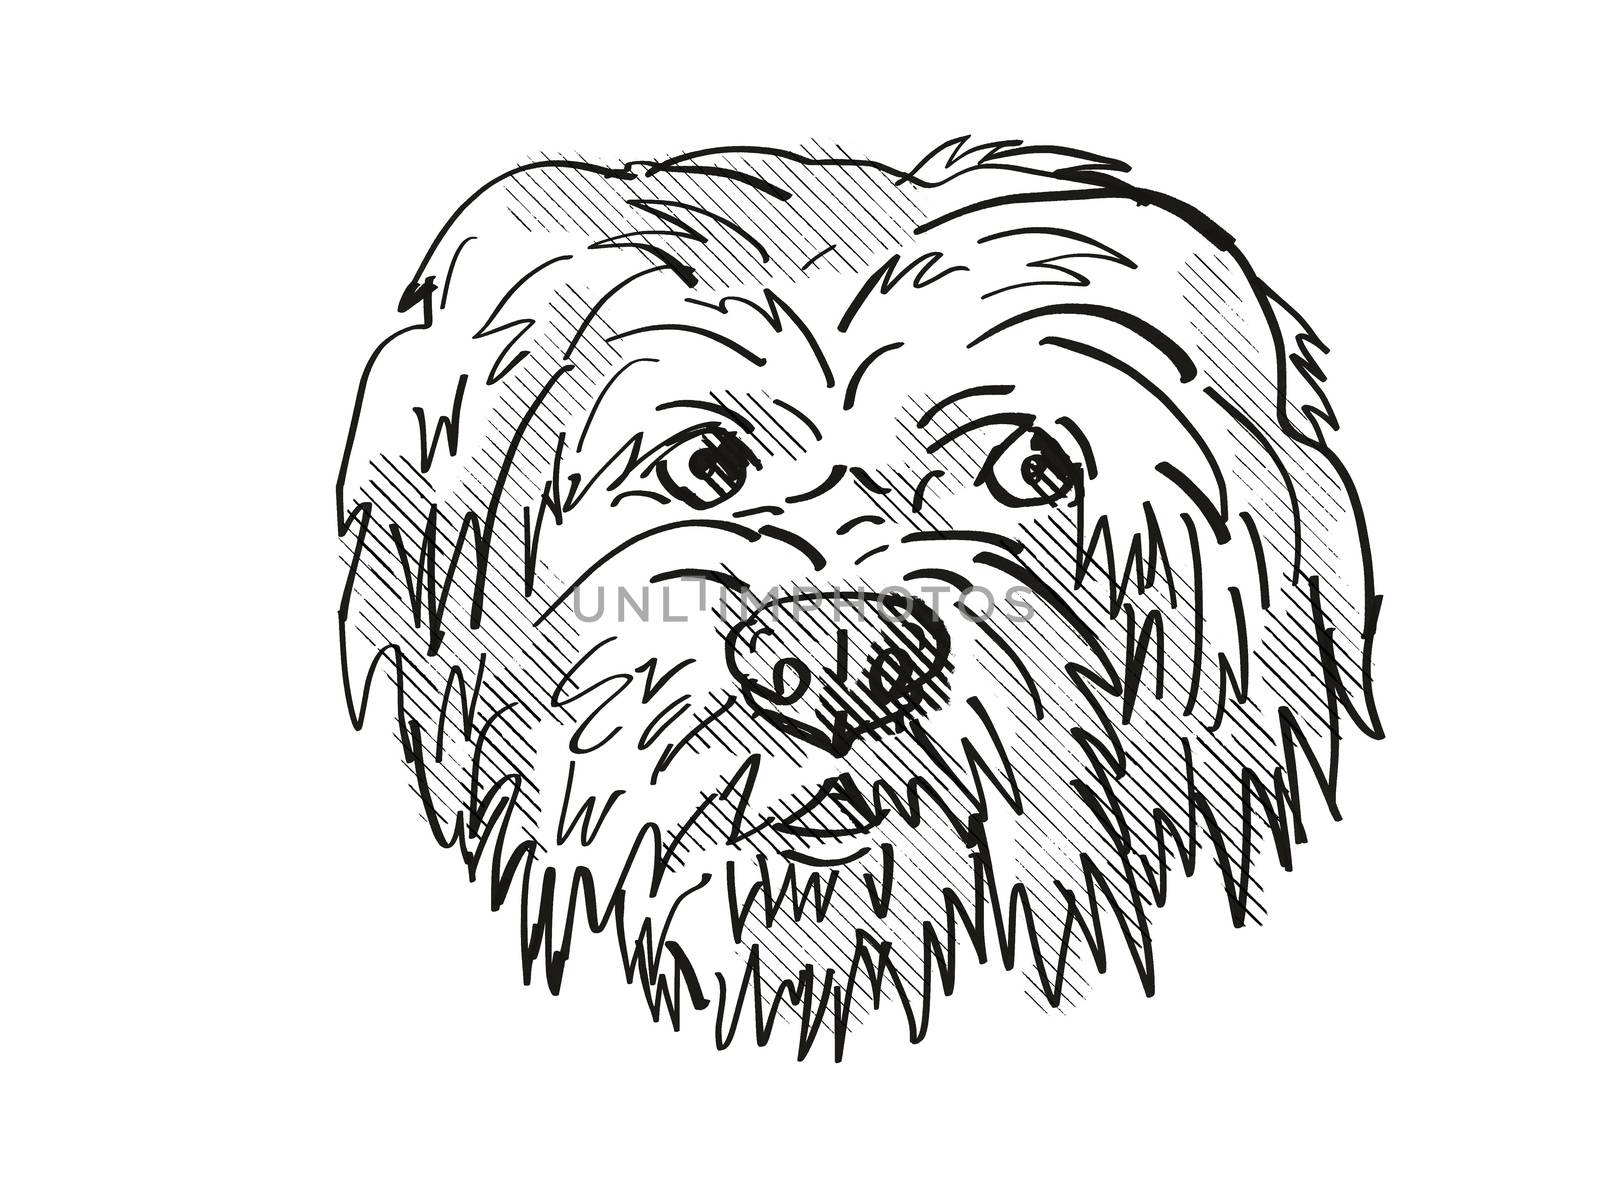 Retro cartoon style drawing of head of a Havanese dog, a domestic canine breed on isolated white background done in black and white.